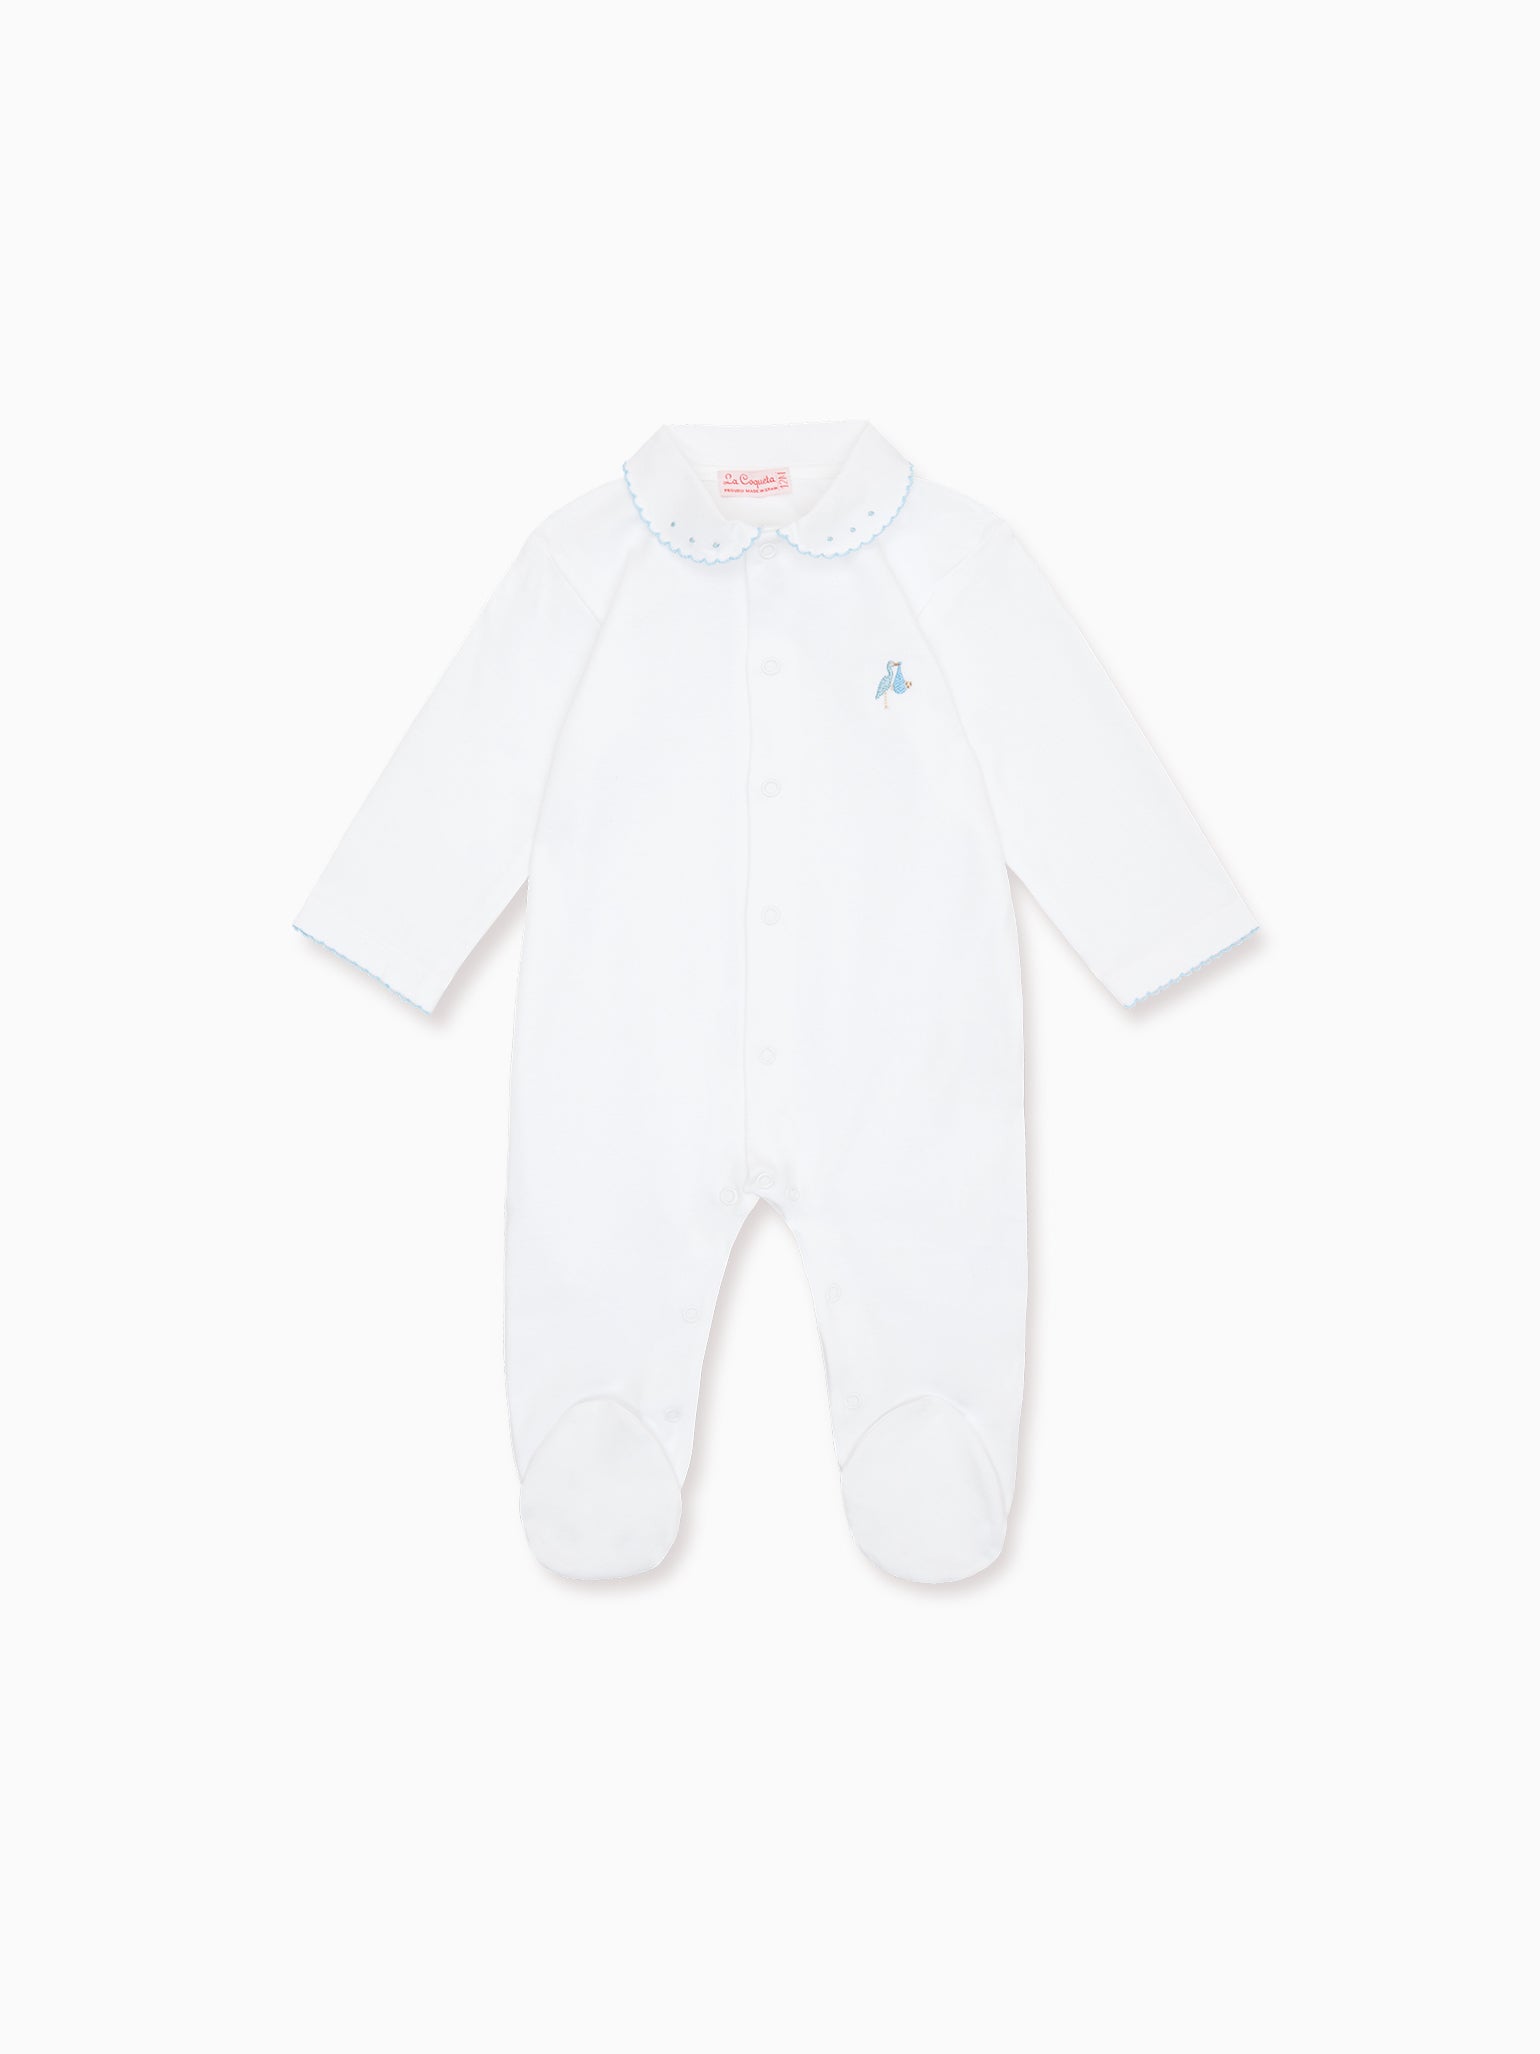 White Stork Embroidered Jersey Sleepsuit